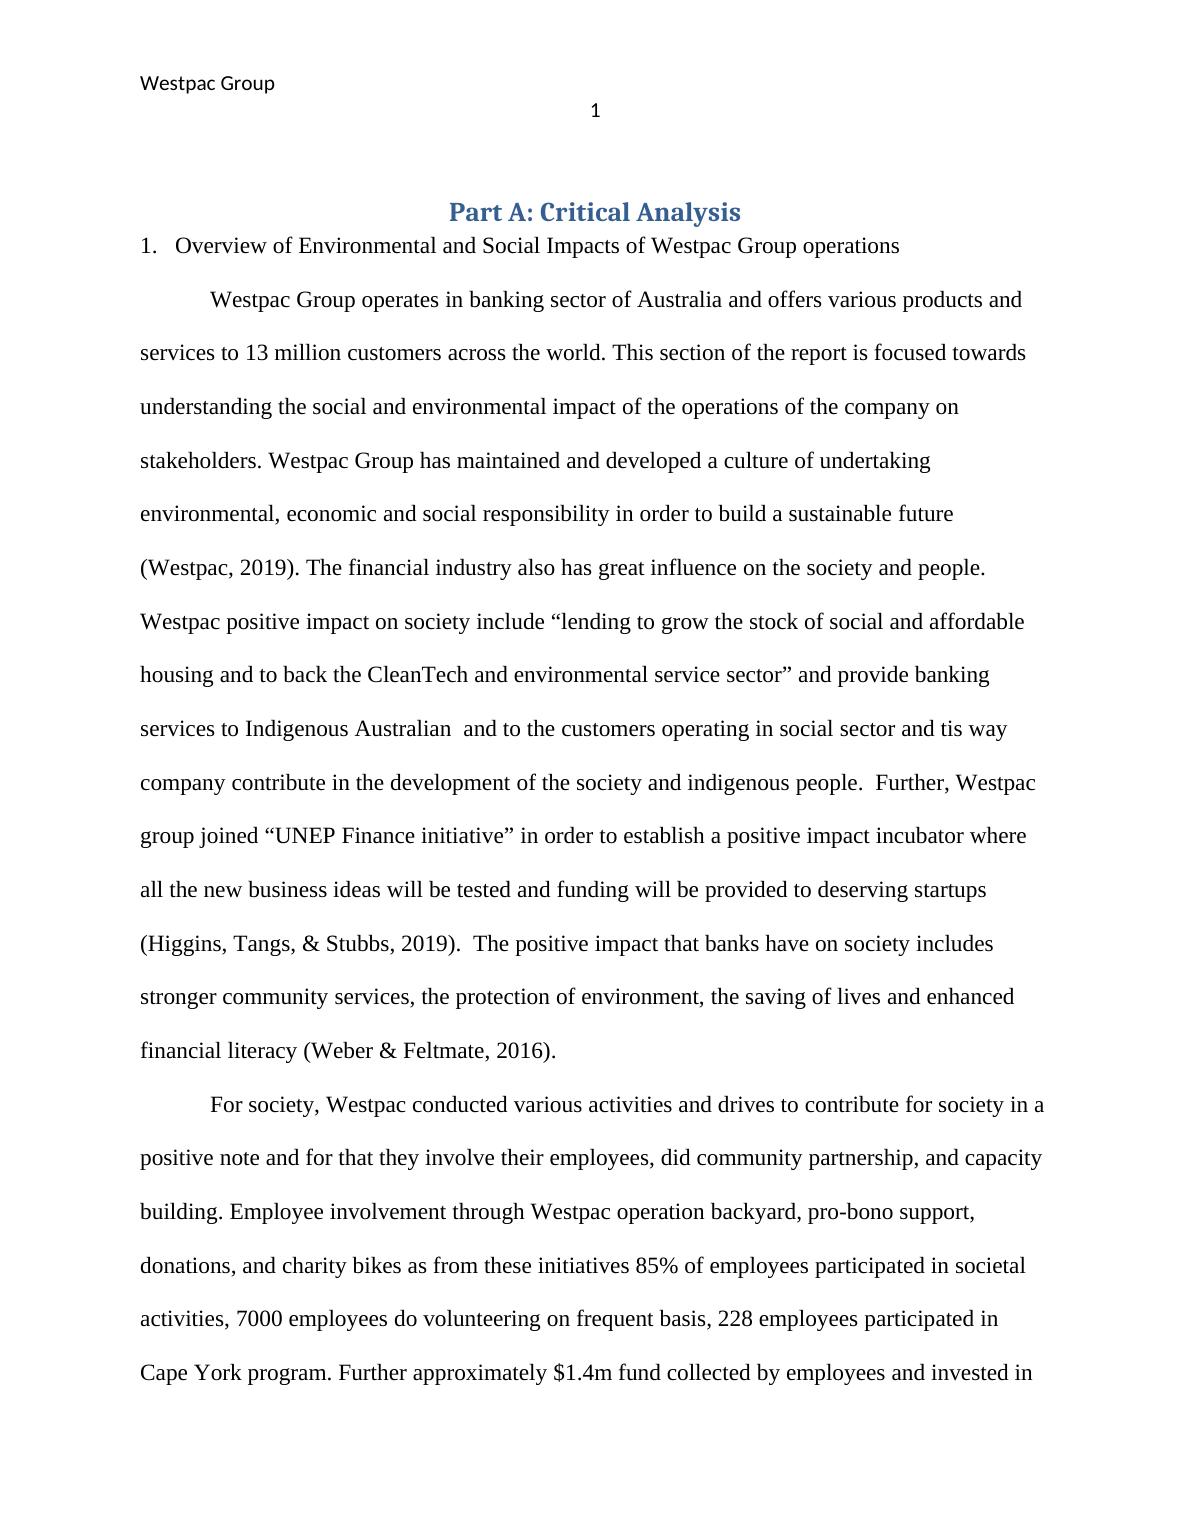 Environmental and Social Impacts of Westpac Group Operations_2